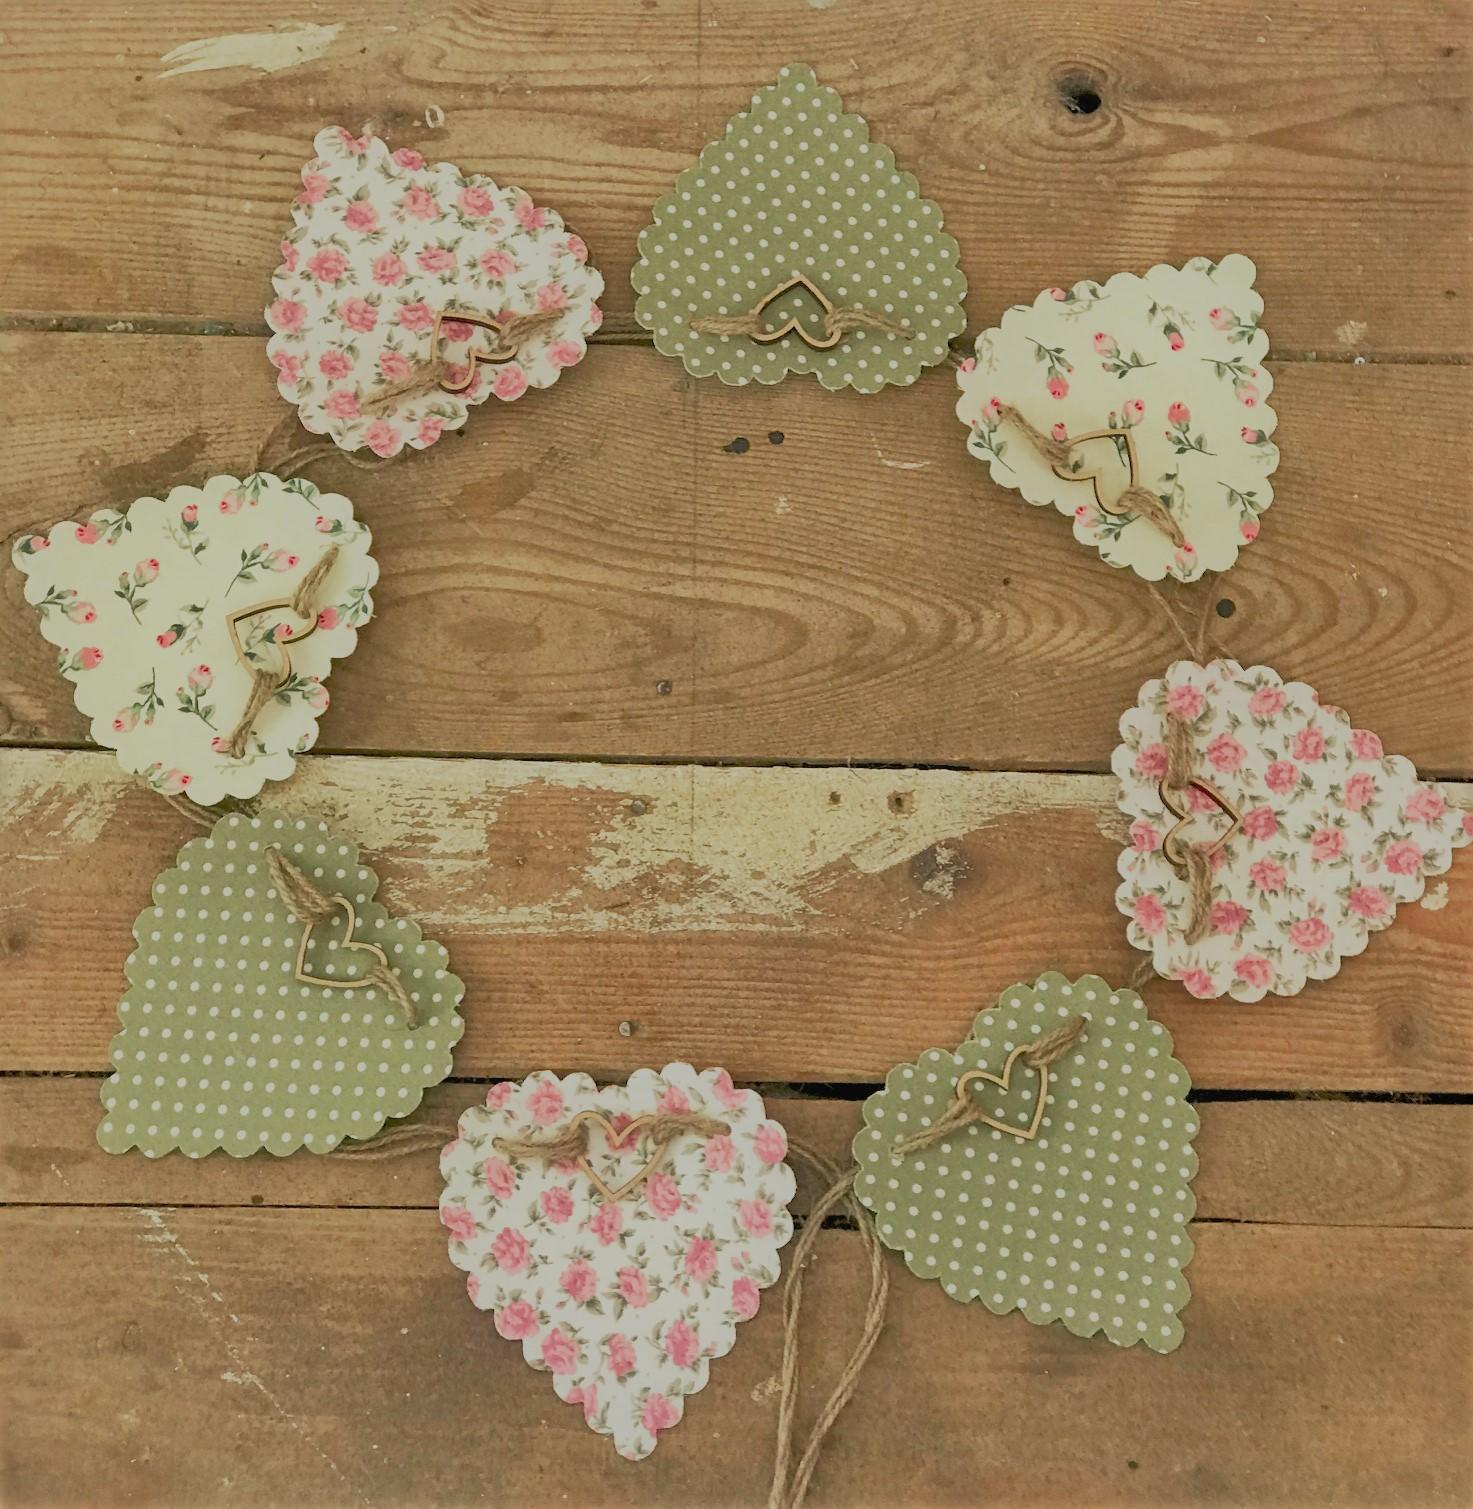 Fabric Bunting,Rigid Hearts,Green and Pink Ditsy Florals and Polka Dots,Vintage Style,100% Cotton,2.5 Metres Long